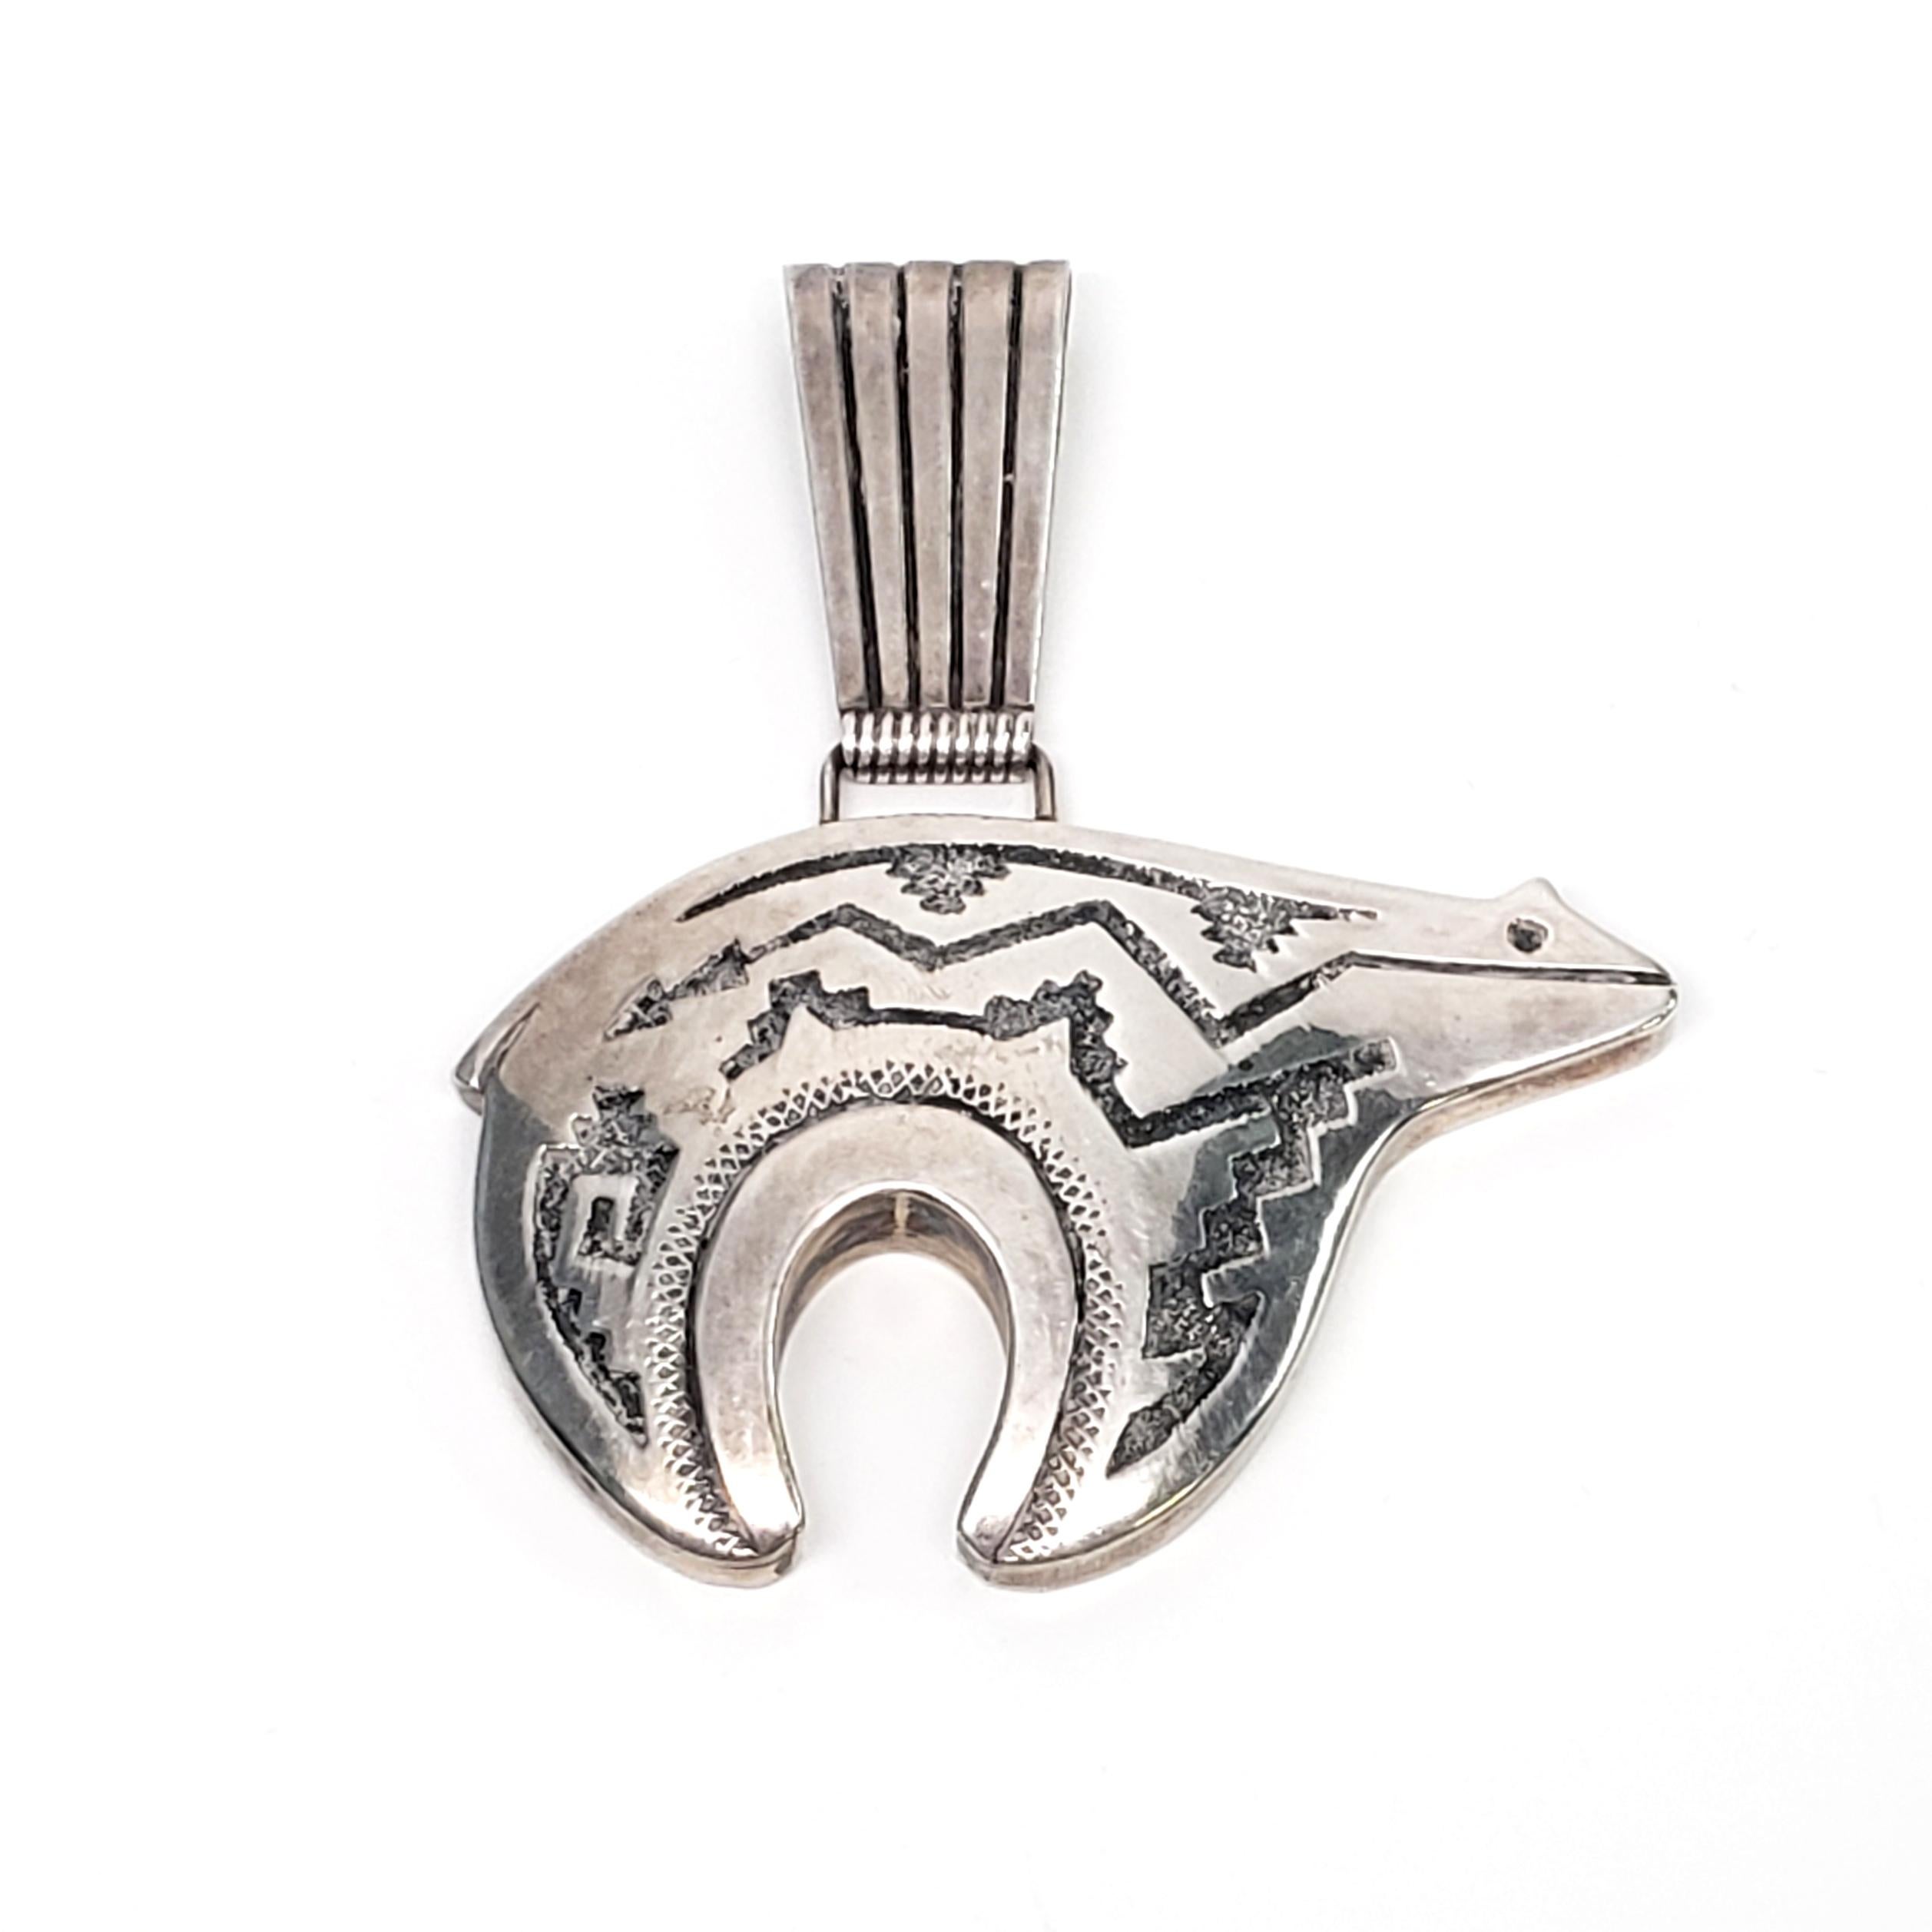 Sterling silver bear pendant by Native American Navajo artisan, Raymond Secatero.

Beautifully handcrafted bear pendant with tribal etched designs. The bear symbolizes a fierce warrior and great hunter in Native American culture.

Measures approx 2